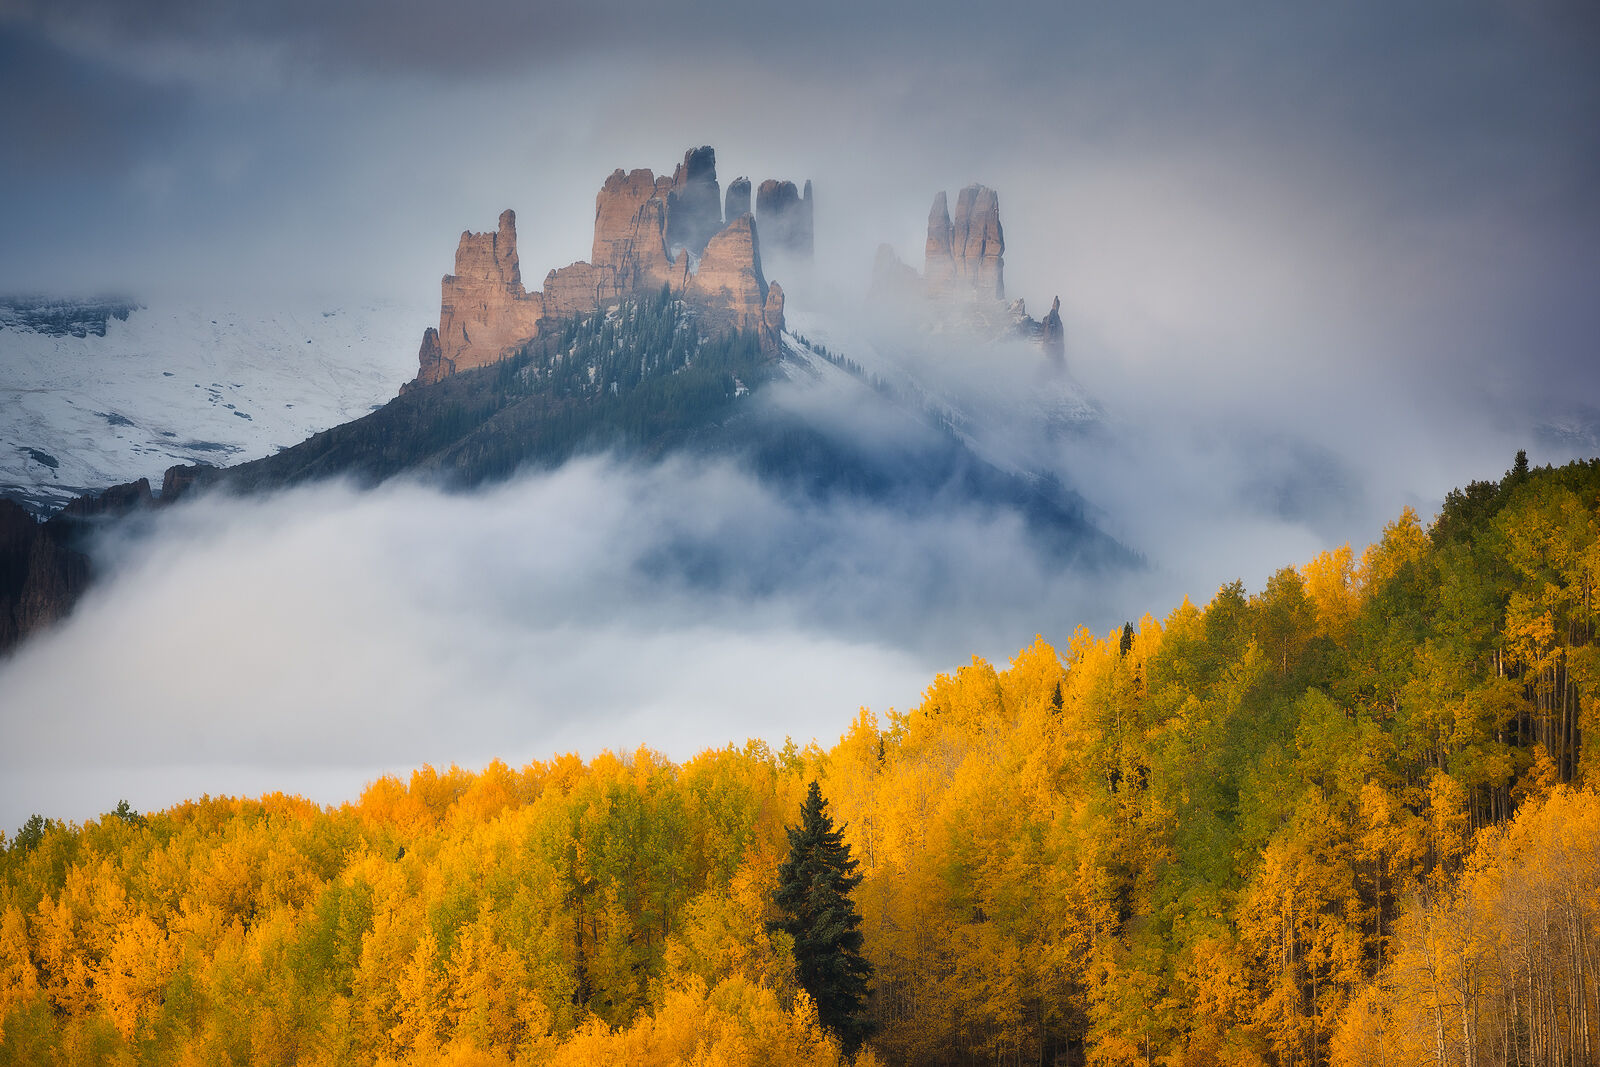 Mountains shaped like castle spires show through and above clouds as the sun breaks through and bright yellow aspens frame the bottom corner of the image.